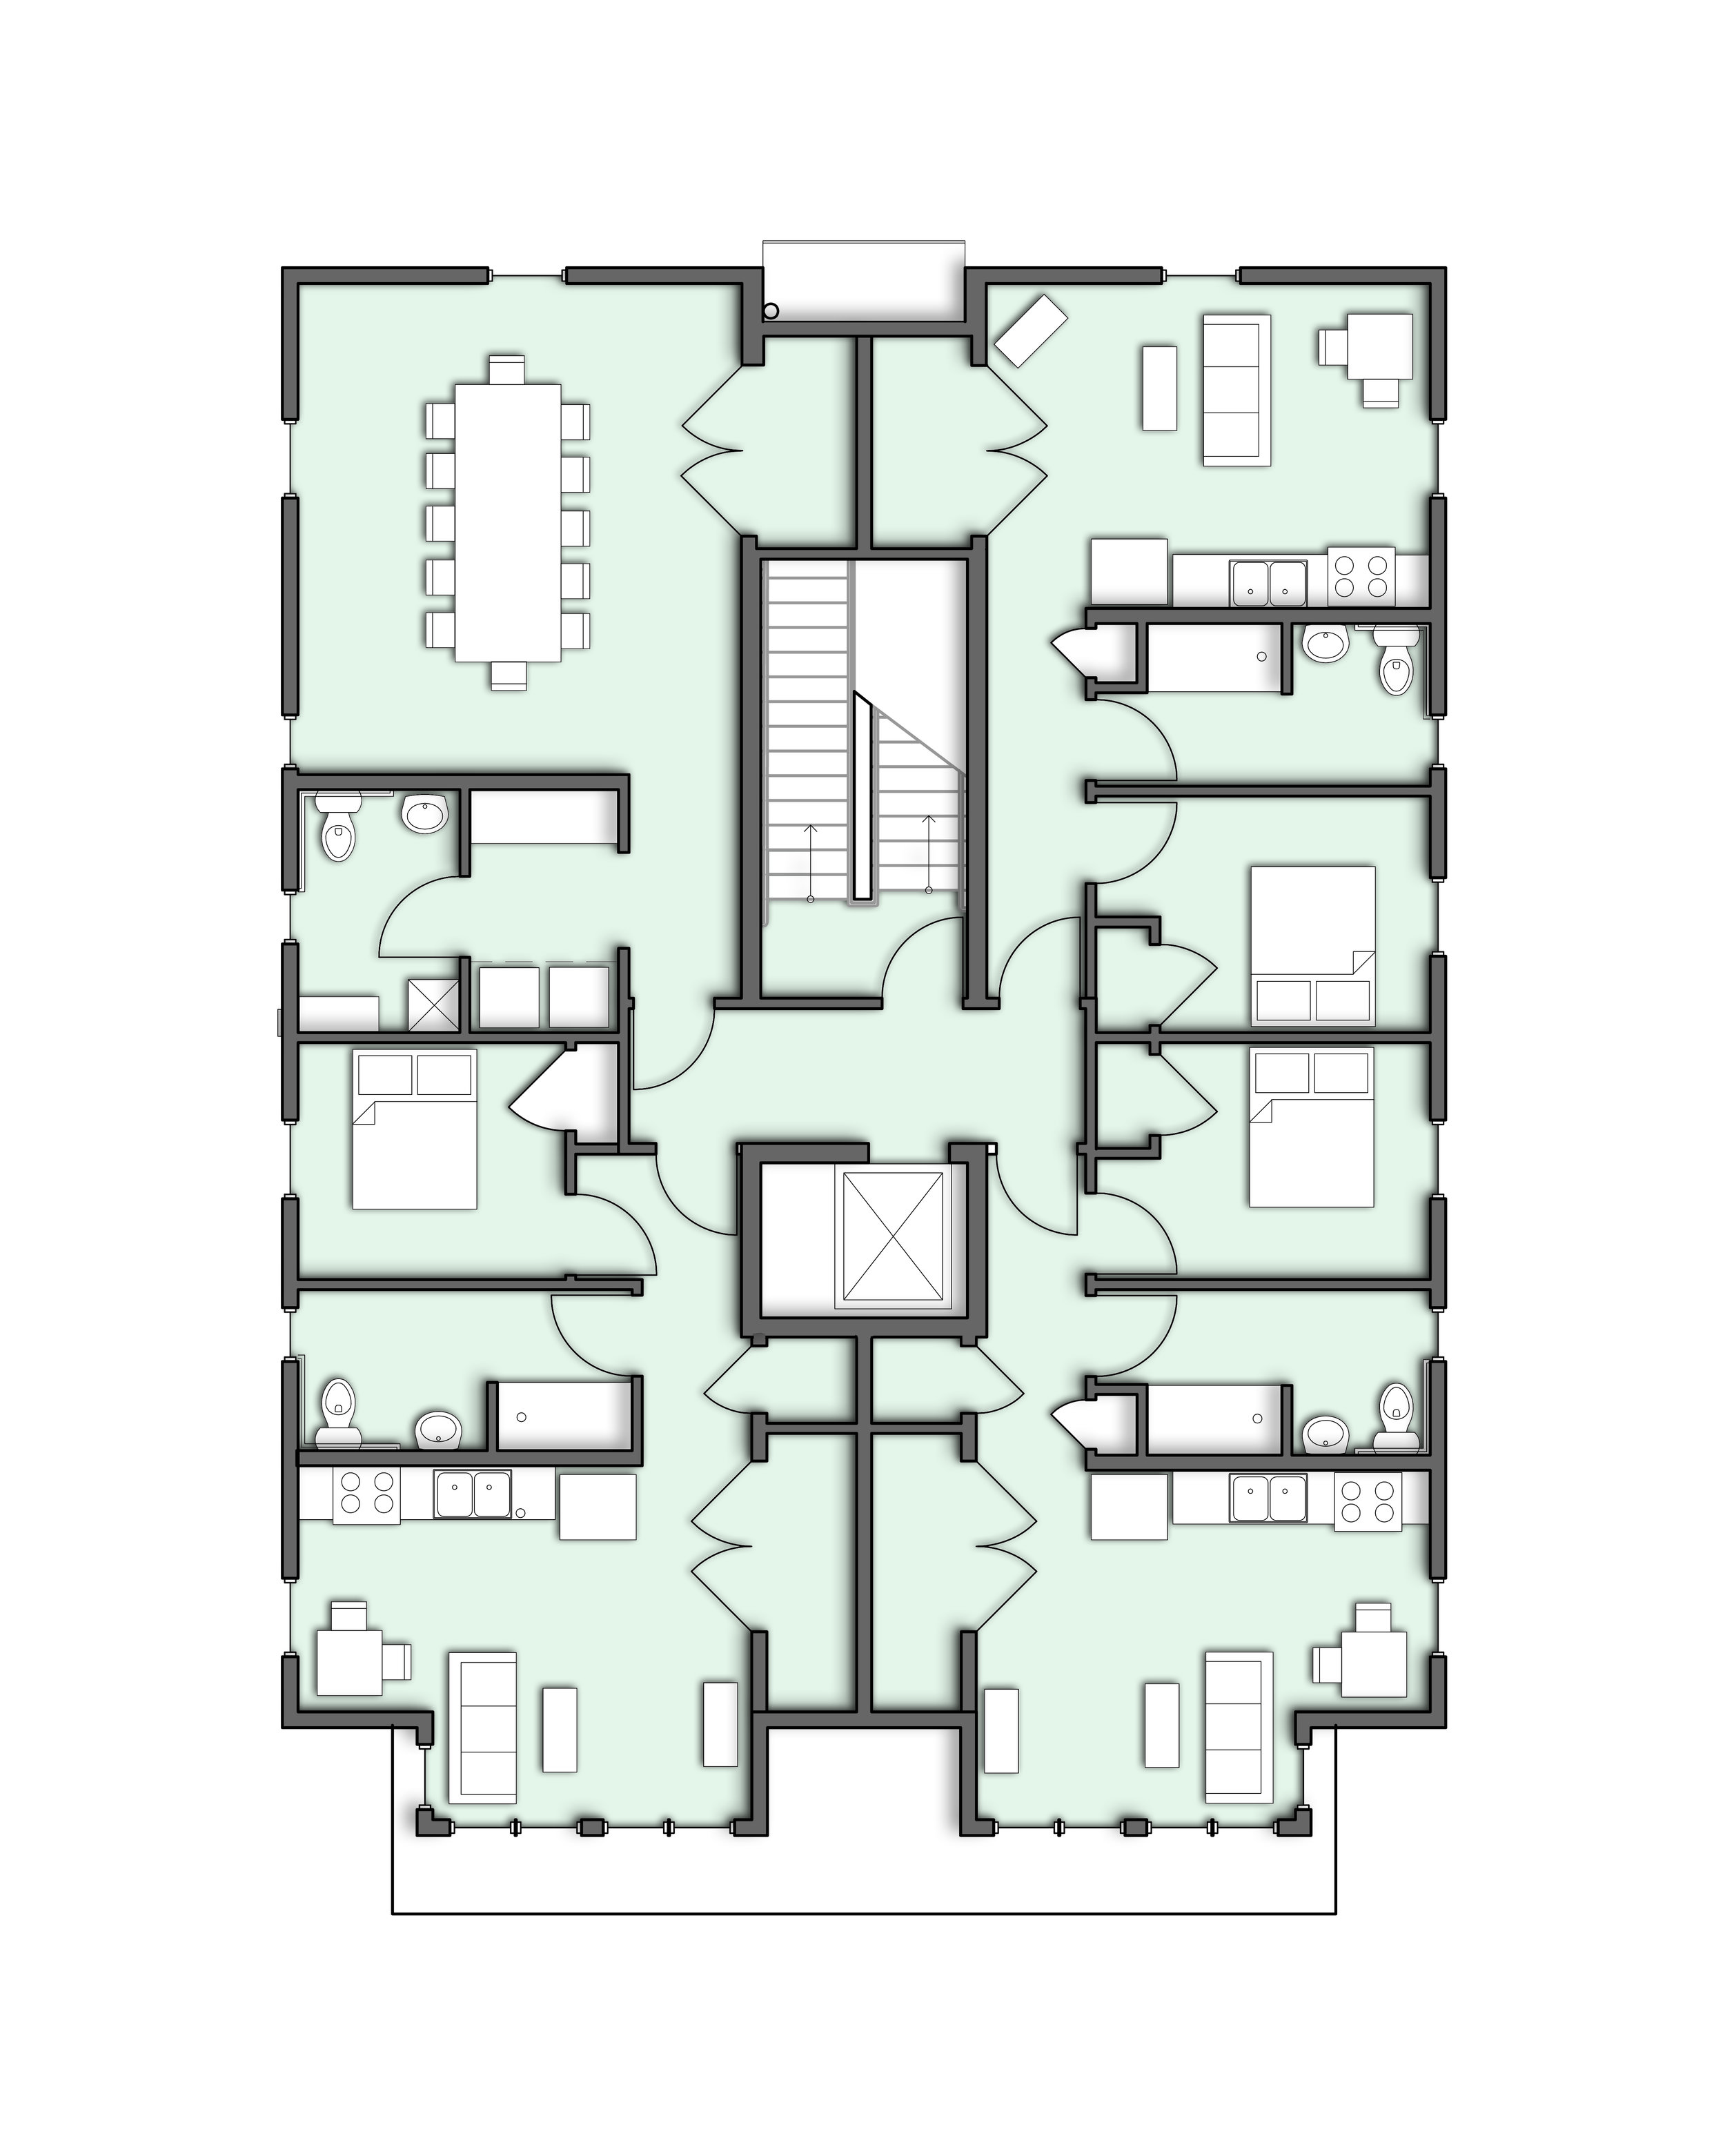  Floor plan of residential units on the 2nd and 3rd floors.  Courtesy of KITE Architects  